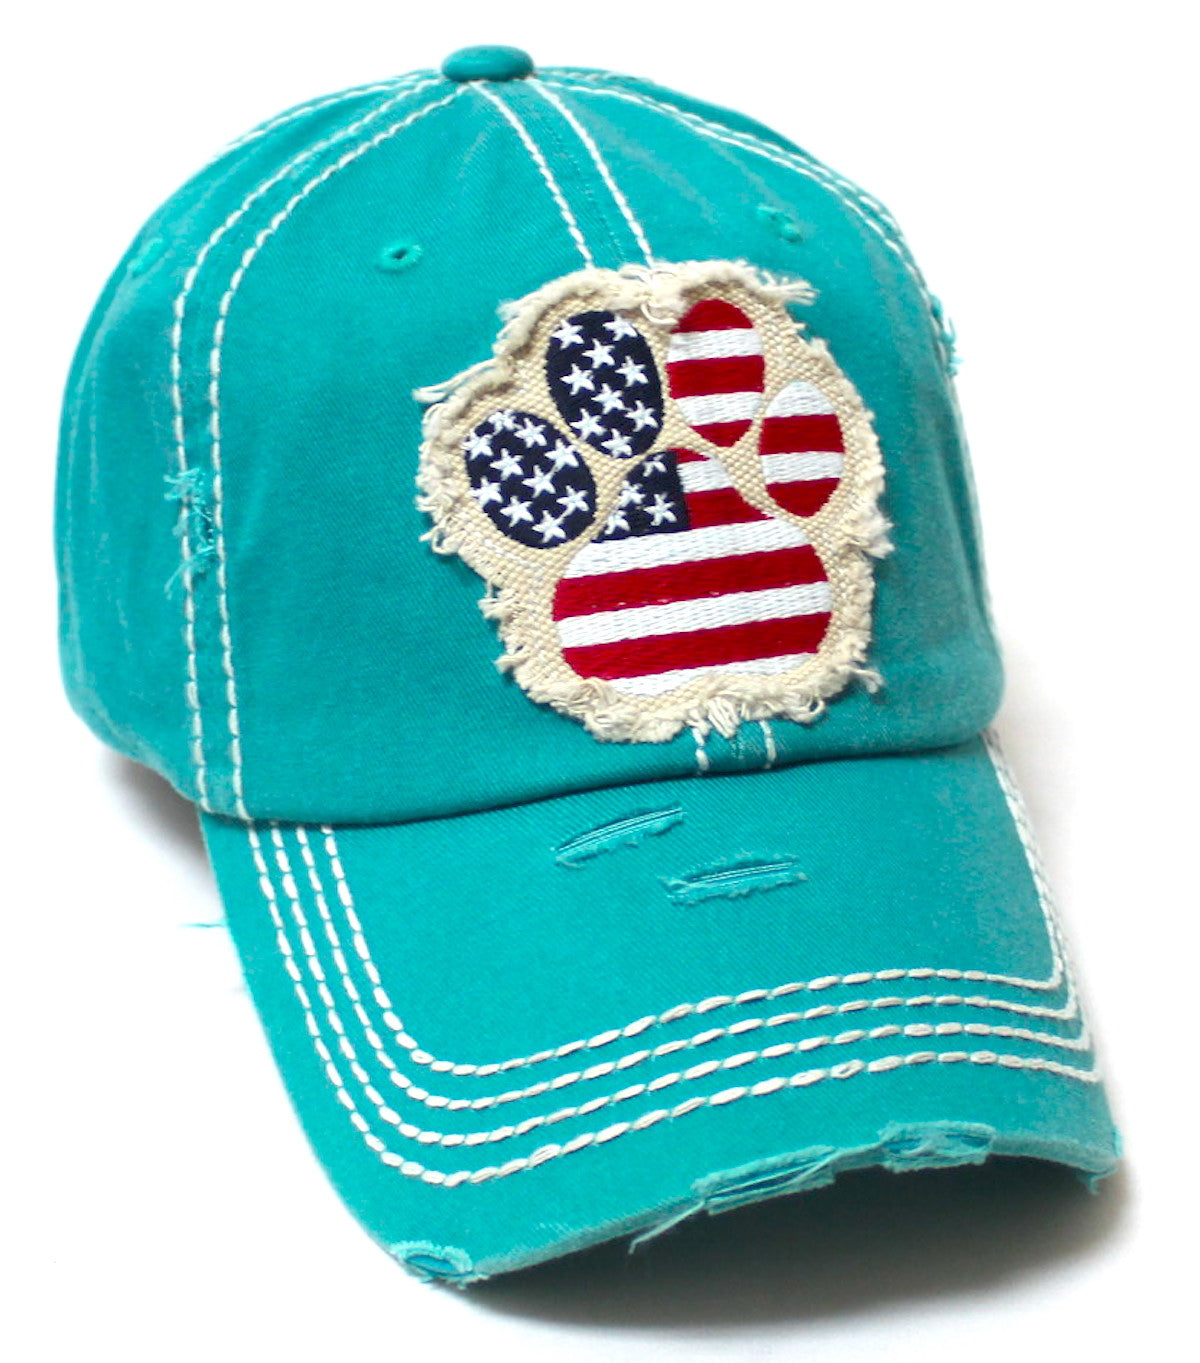 Women's Ballcap American Flag Dog Paw Patch Embroidery Hat, Jewel Turquoise